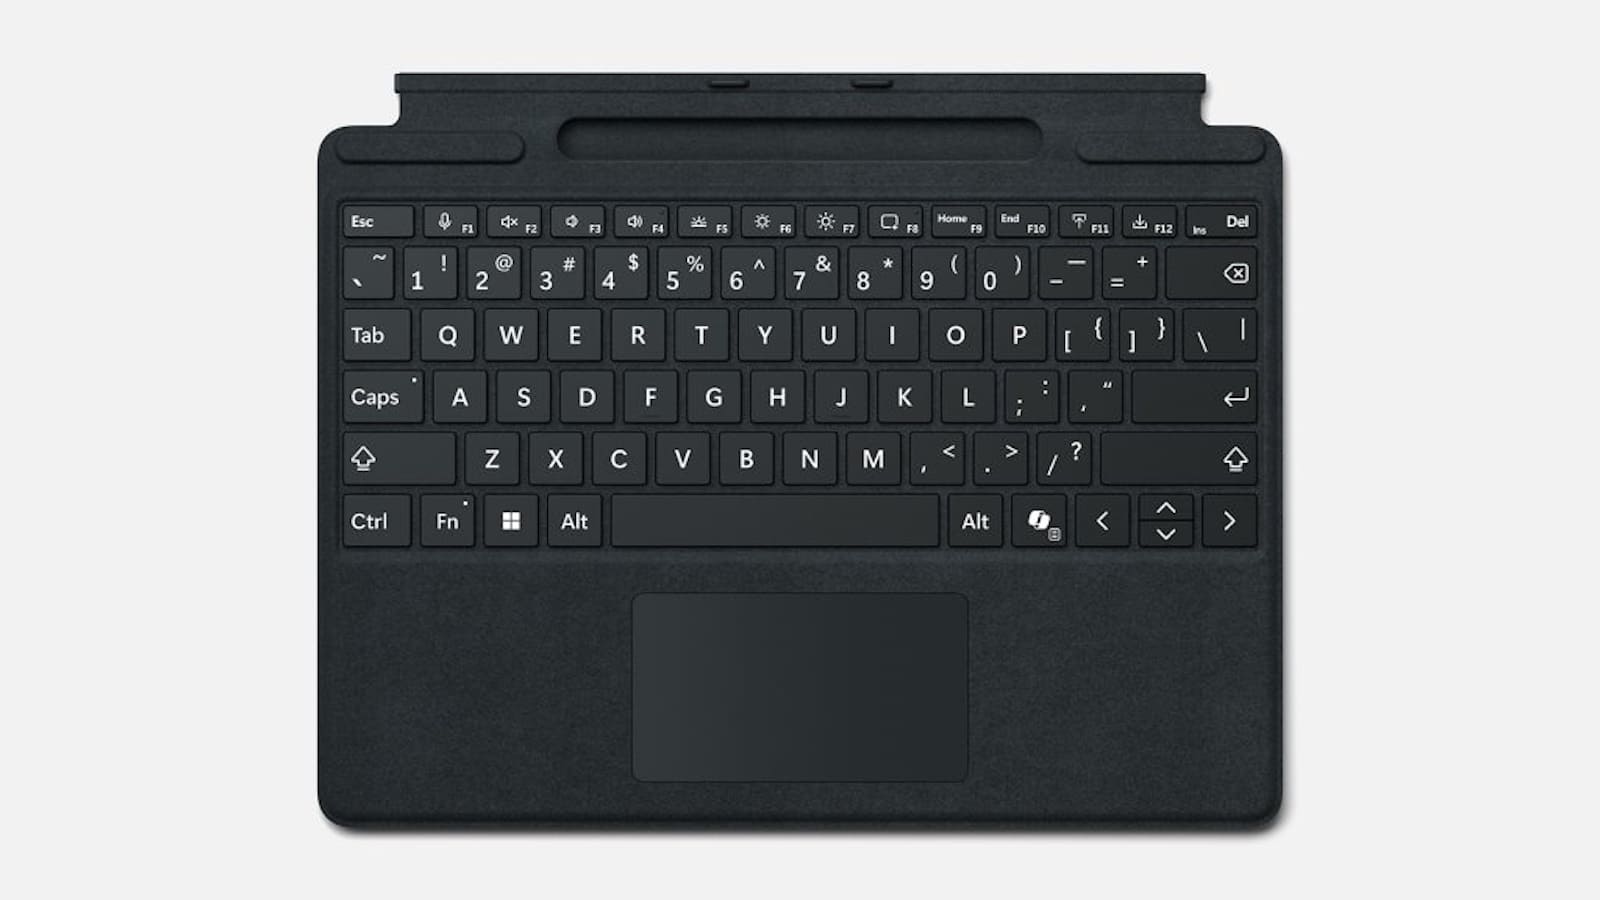 A black keyboard cover with an integrated trackpad for a tablet, shown from a top-down perspective.